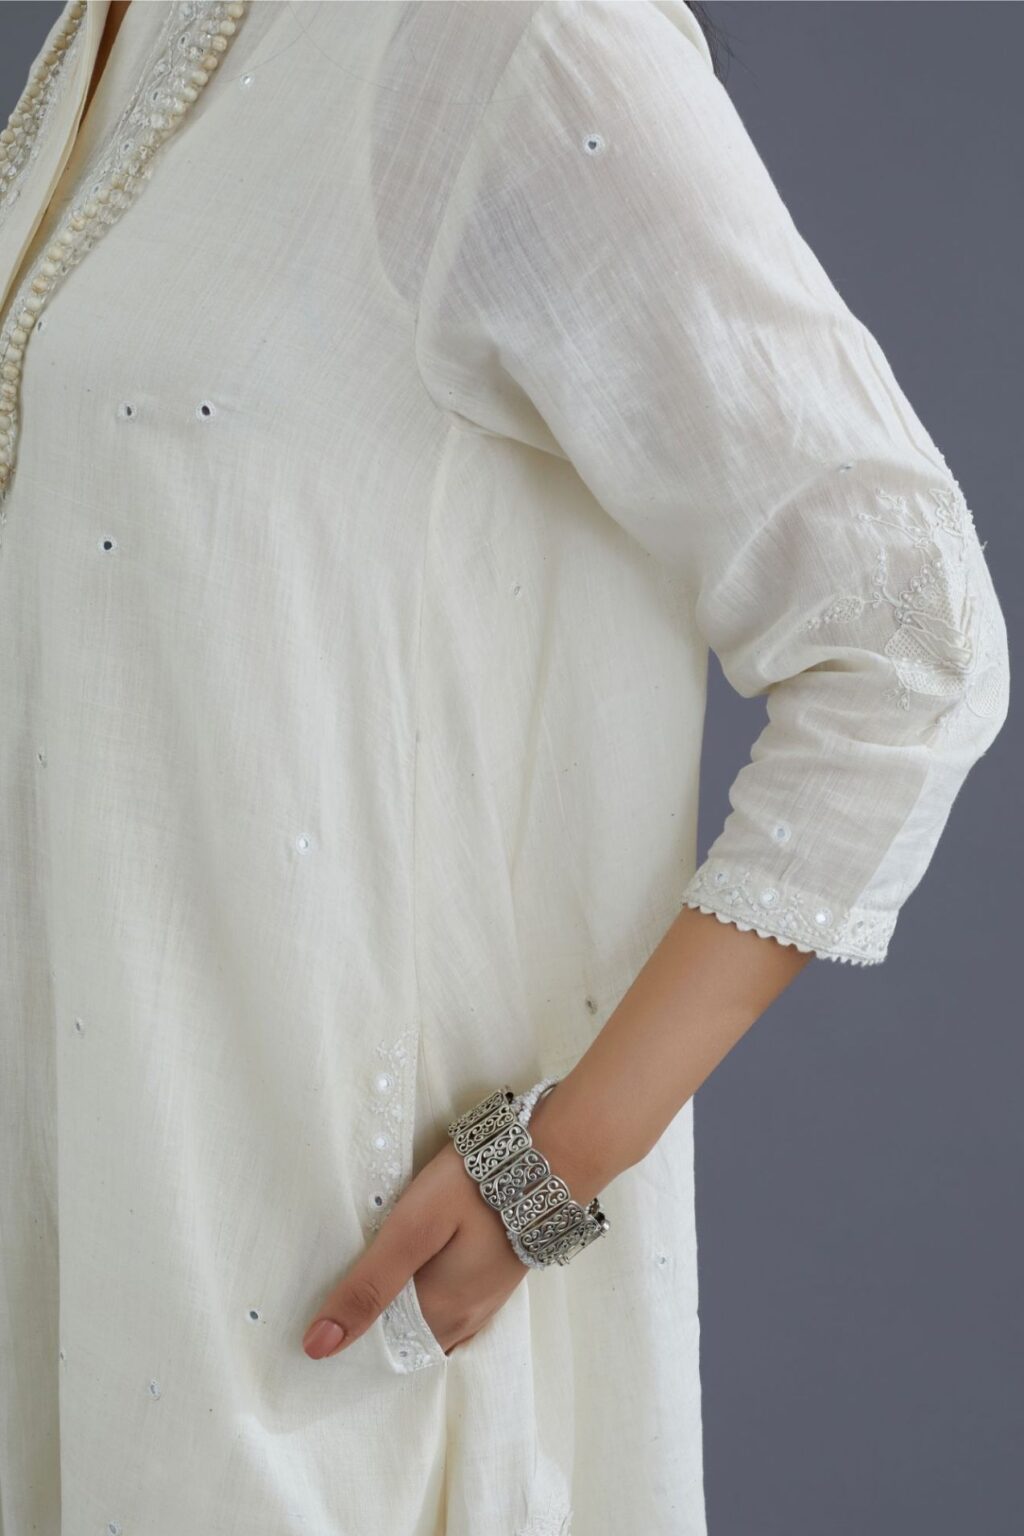 Handspun Hand-Woven cotton short shirt-kurta set with all-over mirror and raised flower embroidery